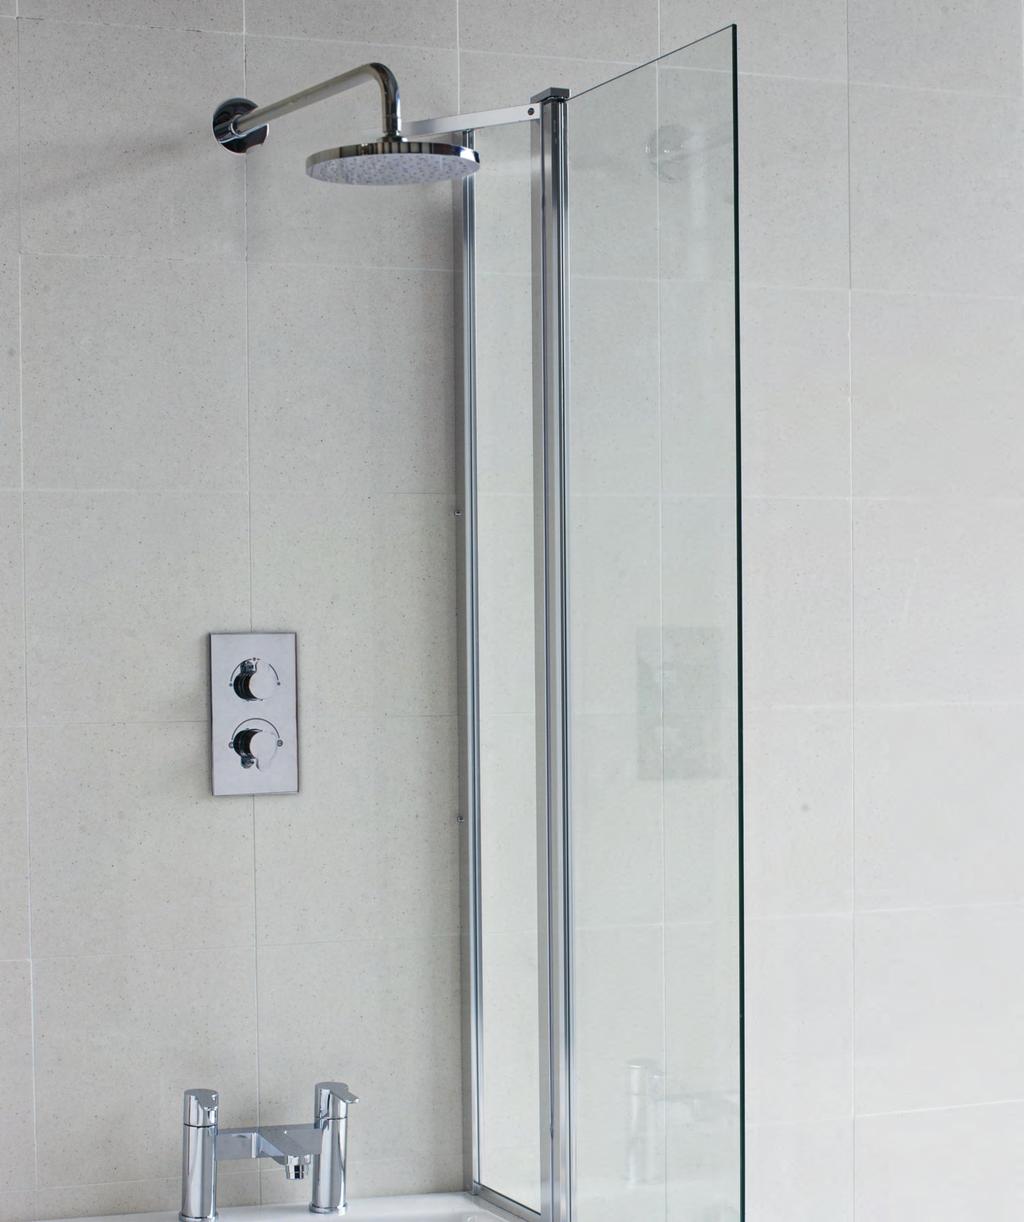 SHOWER SETS SHOWERING Our selection of premium showering products enables you to create a experience single to you and your home.